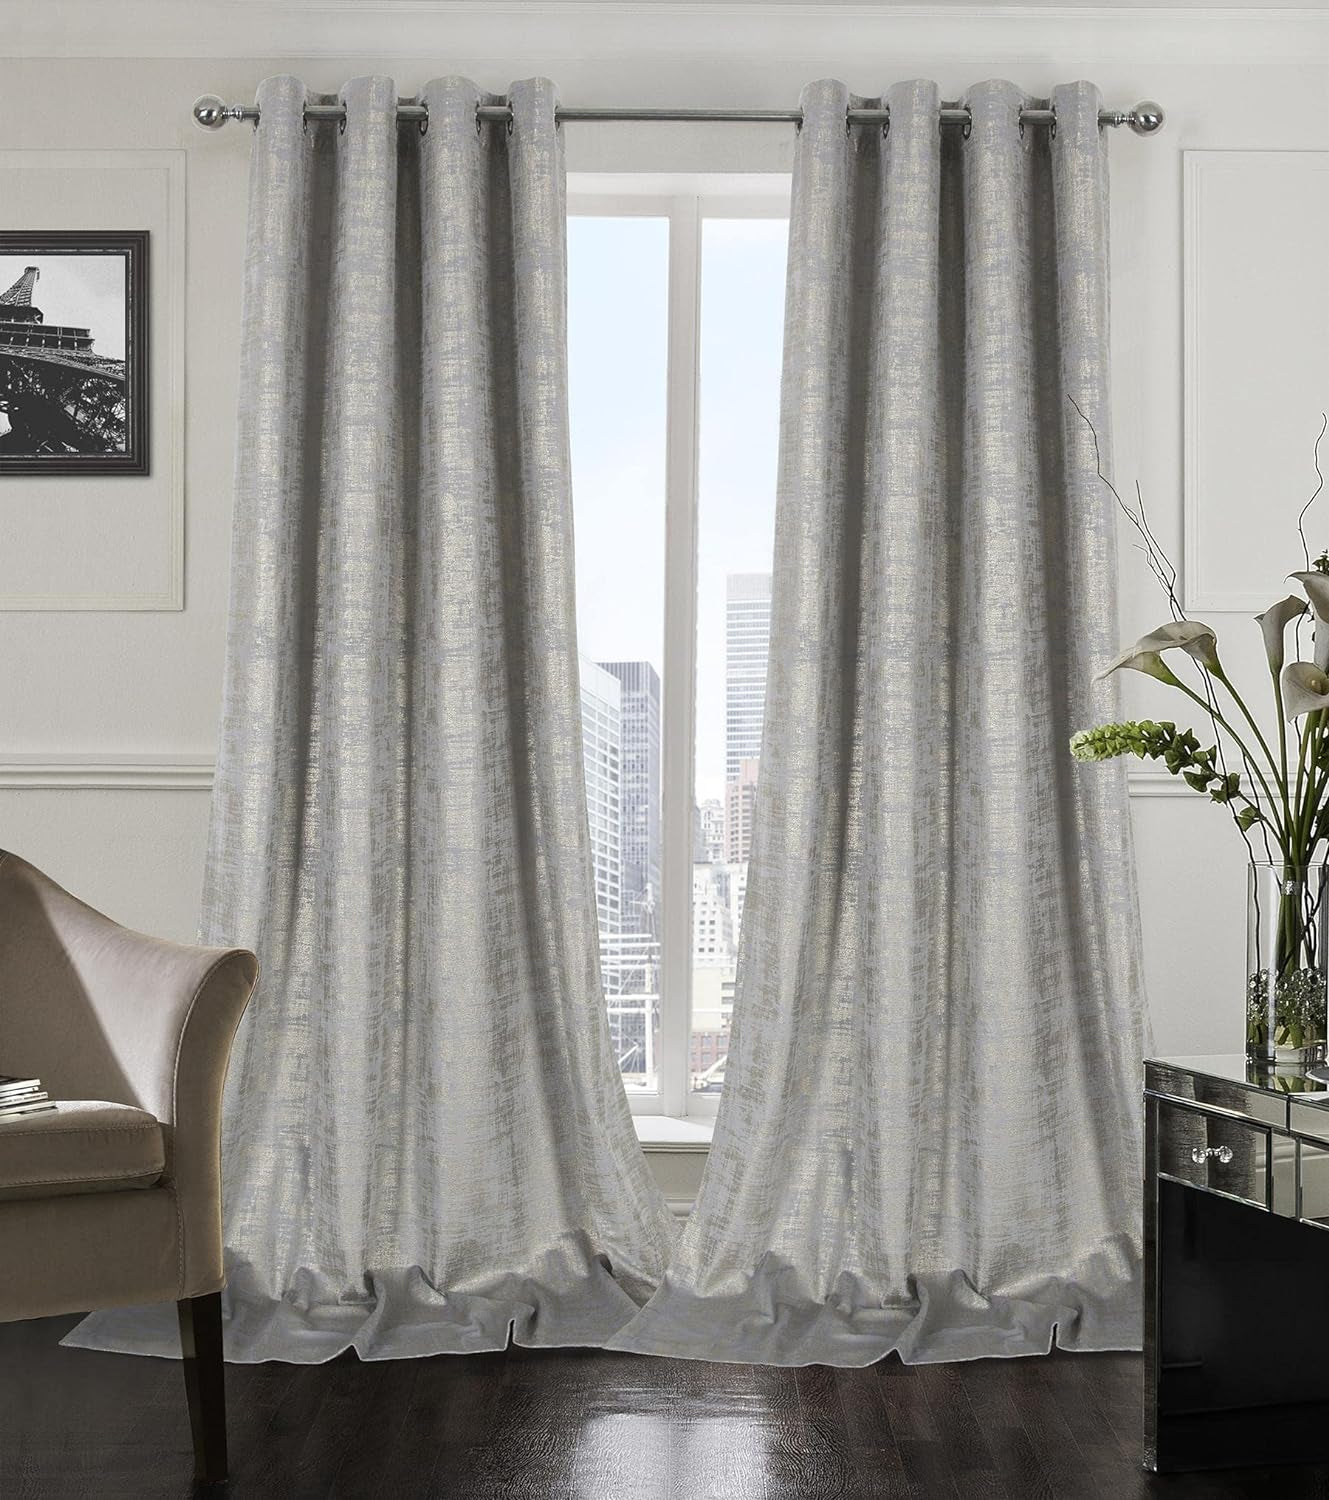 Always4U Soft Velvet Curtains 95 Inch Length Luxury Bedroom Curtains Gold Foil Print Window Curtains for Living Room 1 Panel White  always4u Silver (Gold Print) 2 Panels: 52''W*120''L 